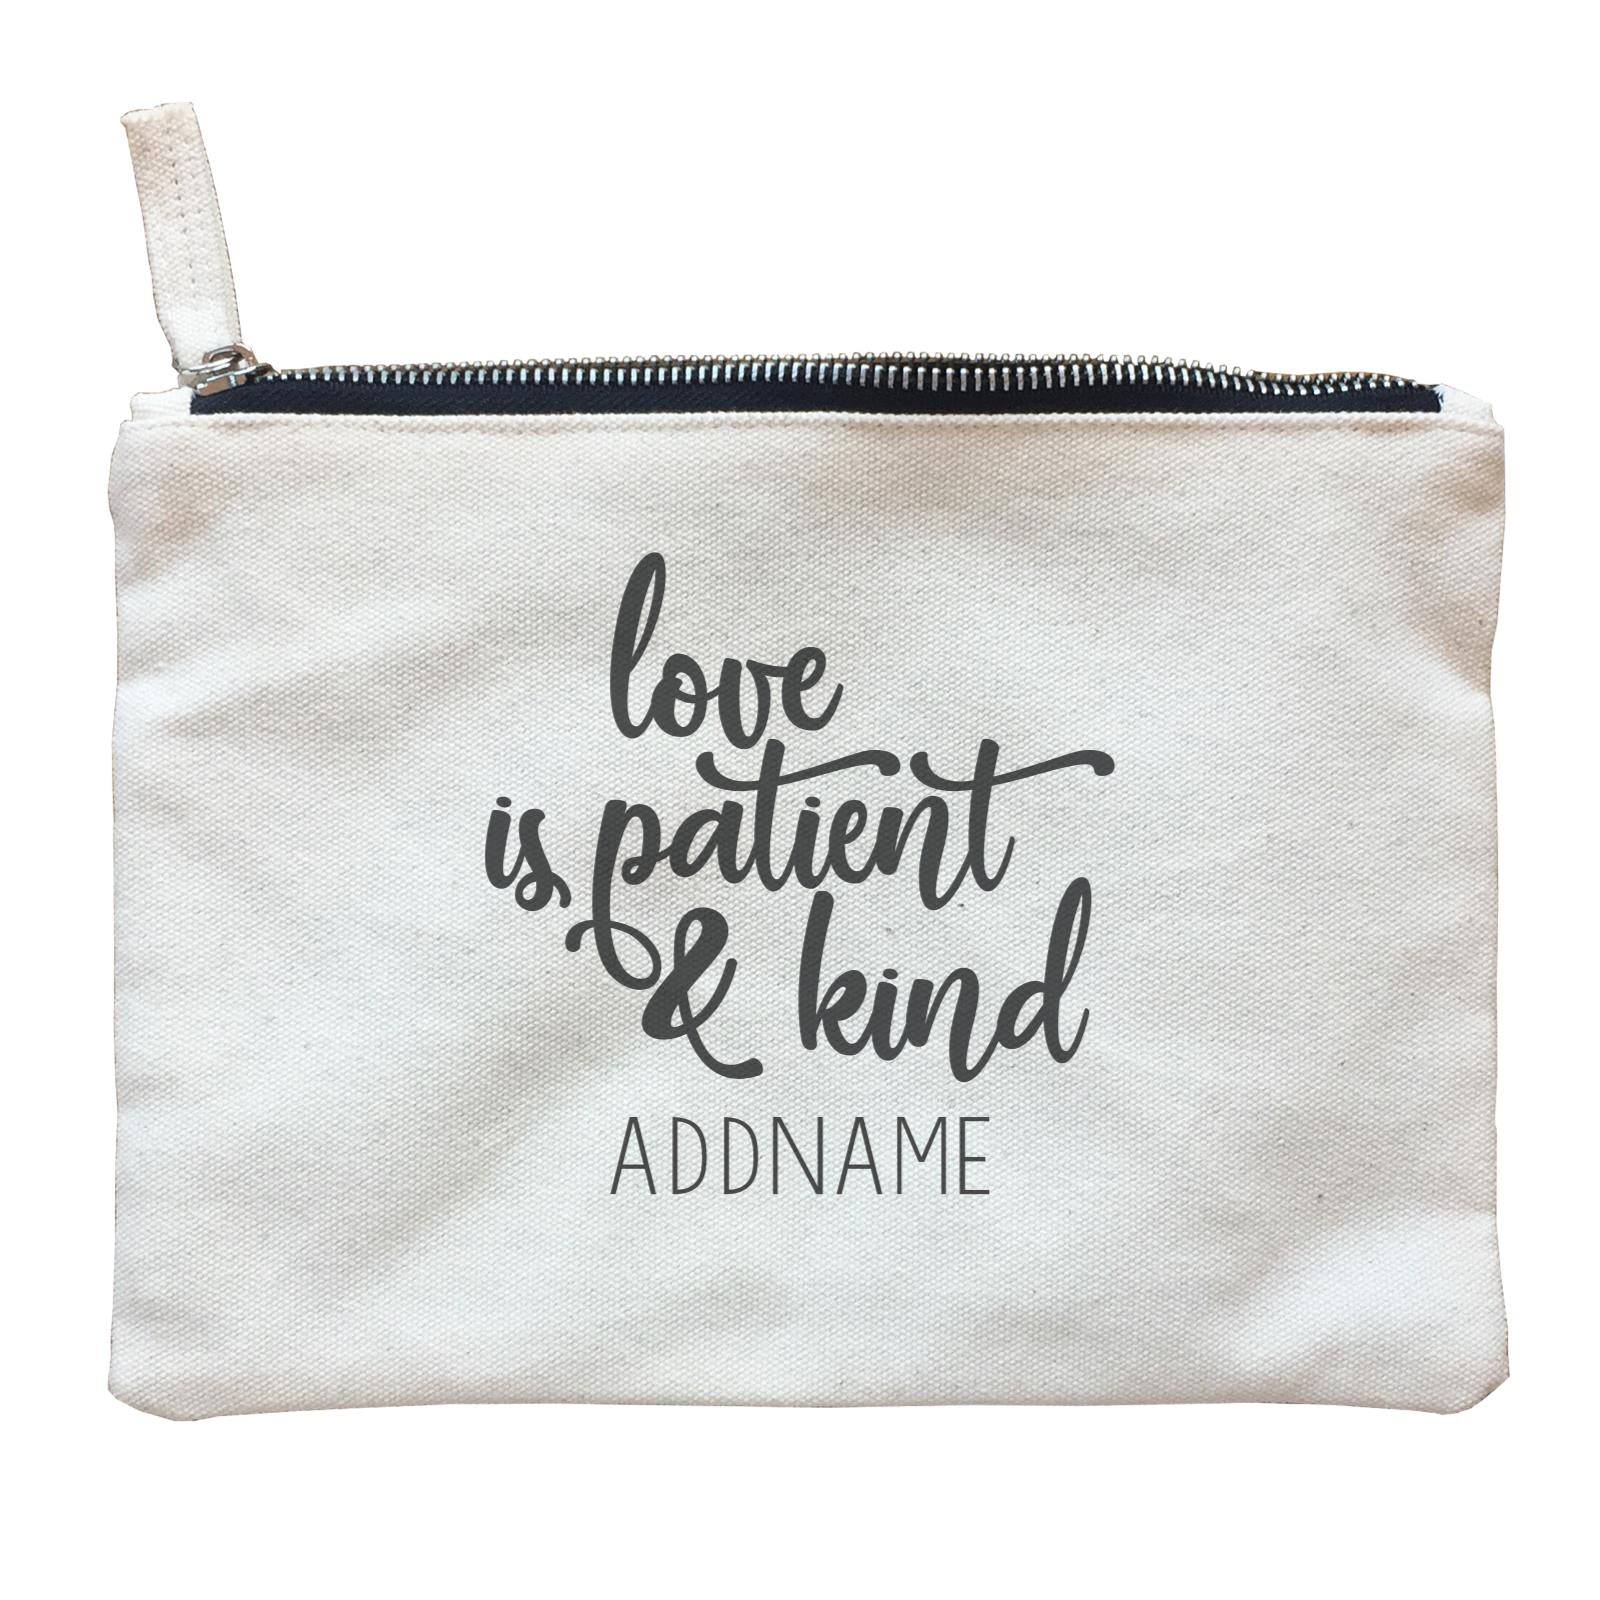 Inspiration Quotes Love Is Patient And Kind Addname Zipper Pouch